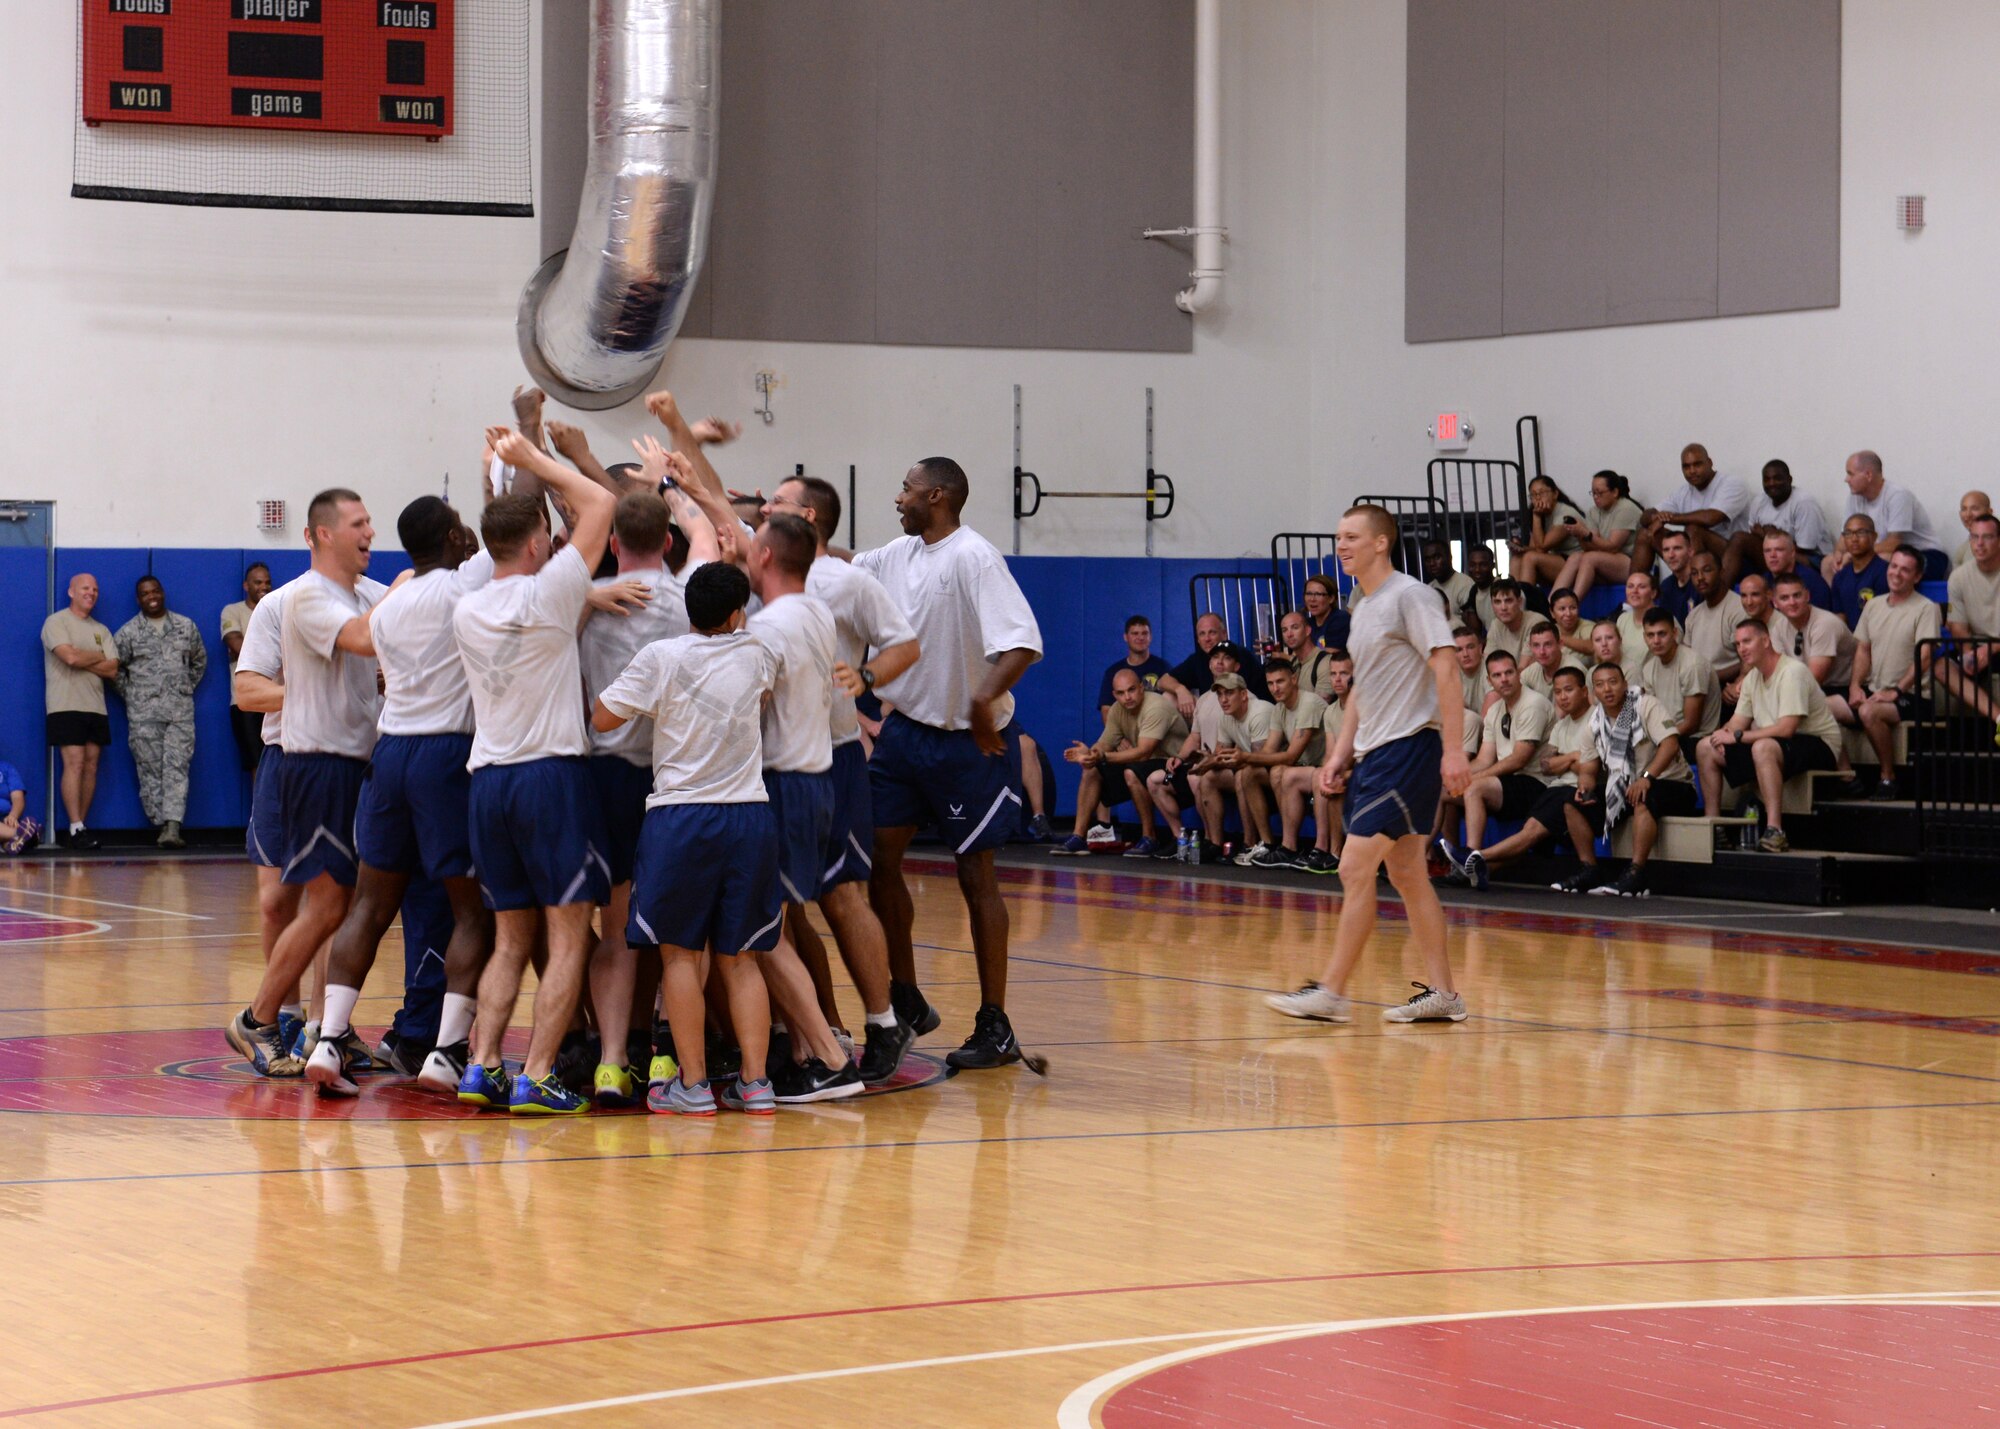 The 36th Security Forces Squadron cheers after winning the final championship basketball game during Resiliency Day Nov. 21, 2014, on Andersen Air Force Base, Guam. Resiliency Day was designed to give Airmen a chance to experience wingmanship and resiliency through training and team building sports. (U.S. Air Force photo by Senior Airman Cierra Presentado/Released)